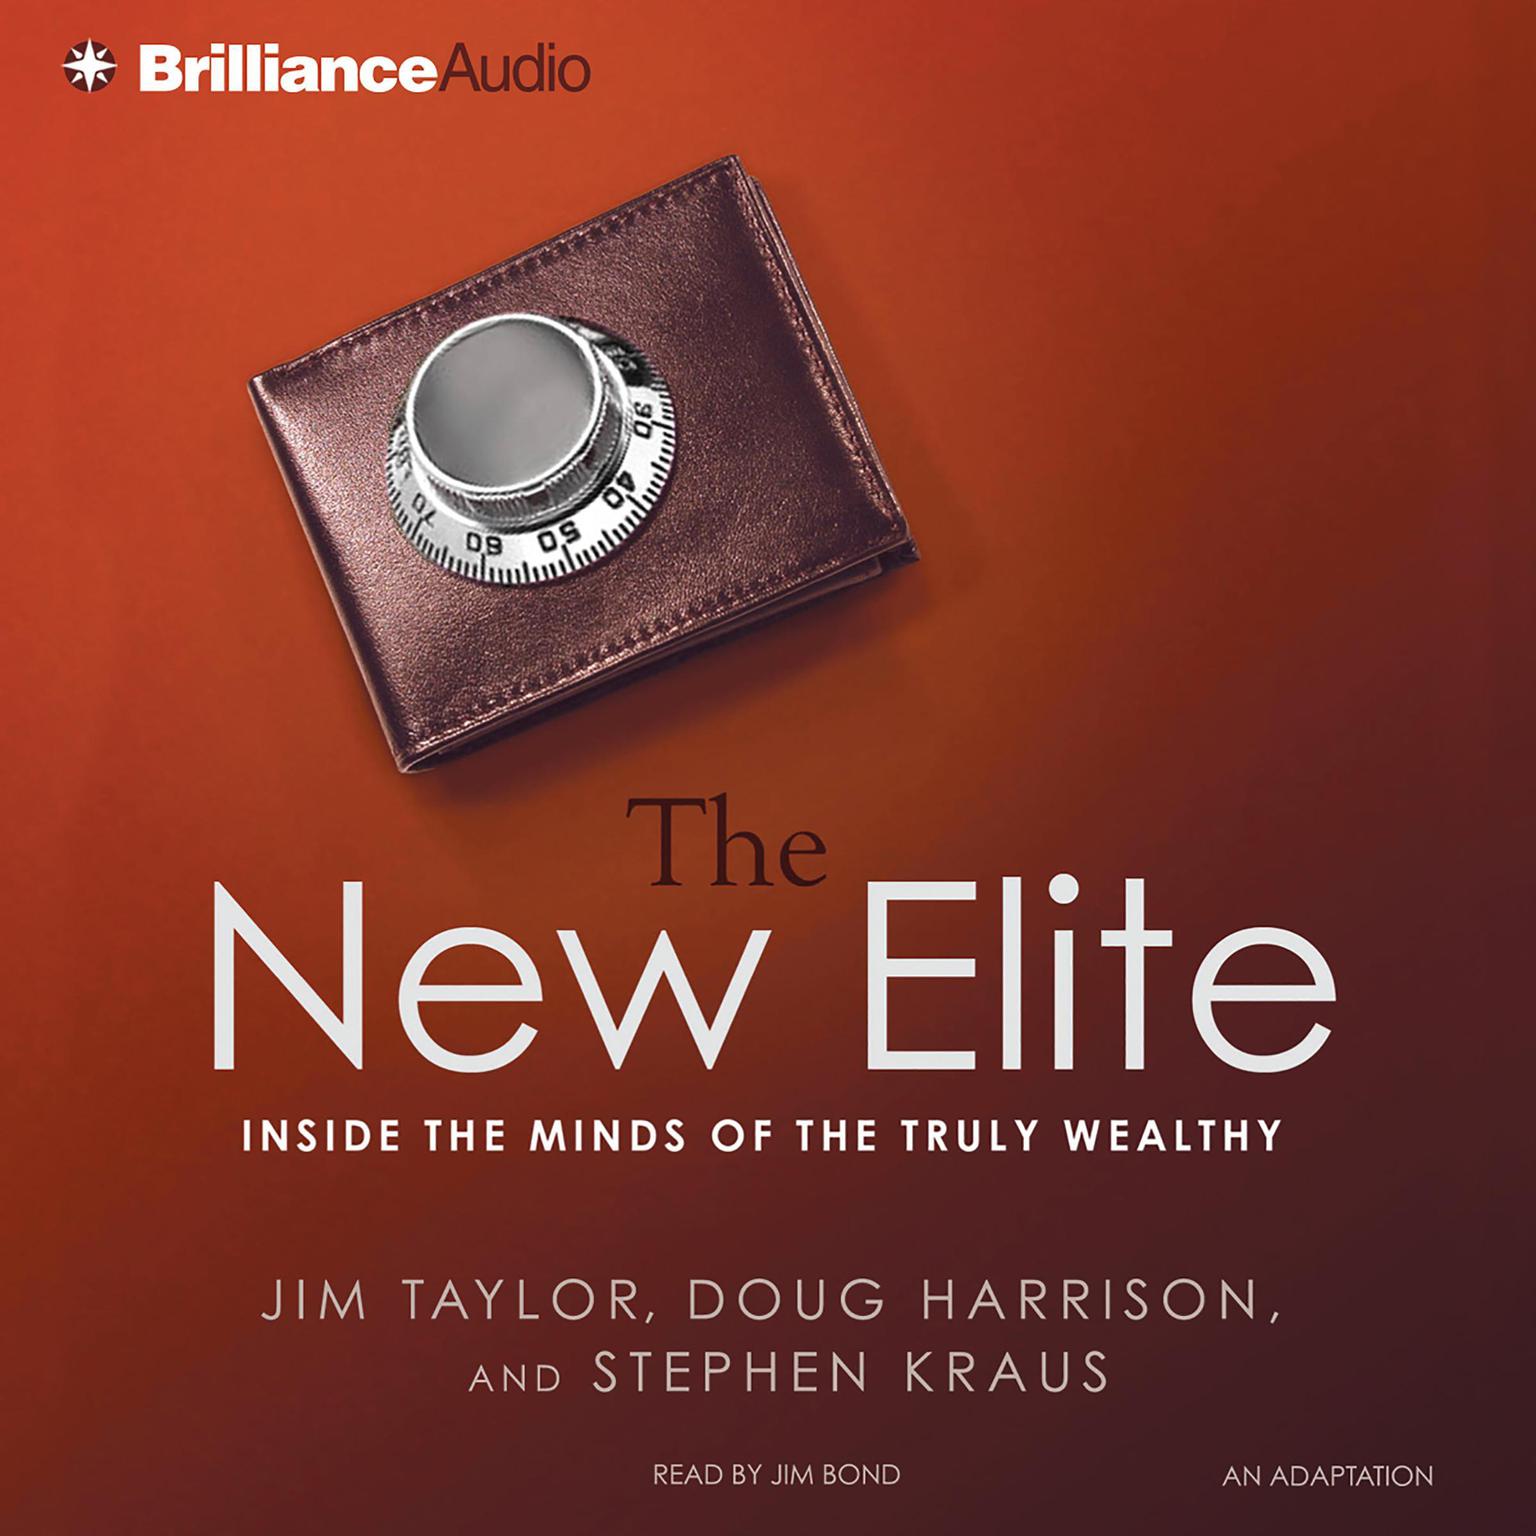 The New Elite (Abridged): Inside the Minds of the Truly Wealthy Audiobook, by Jim Taylor